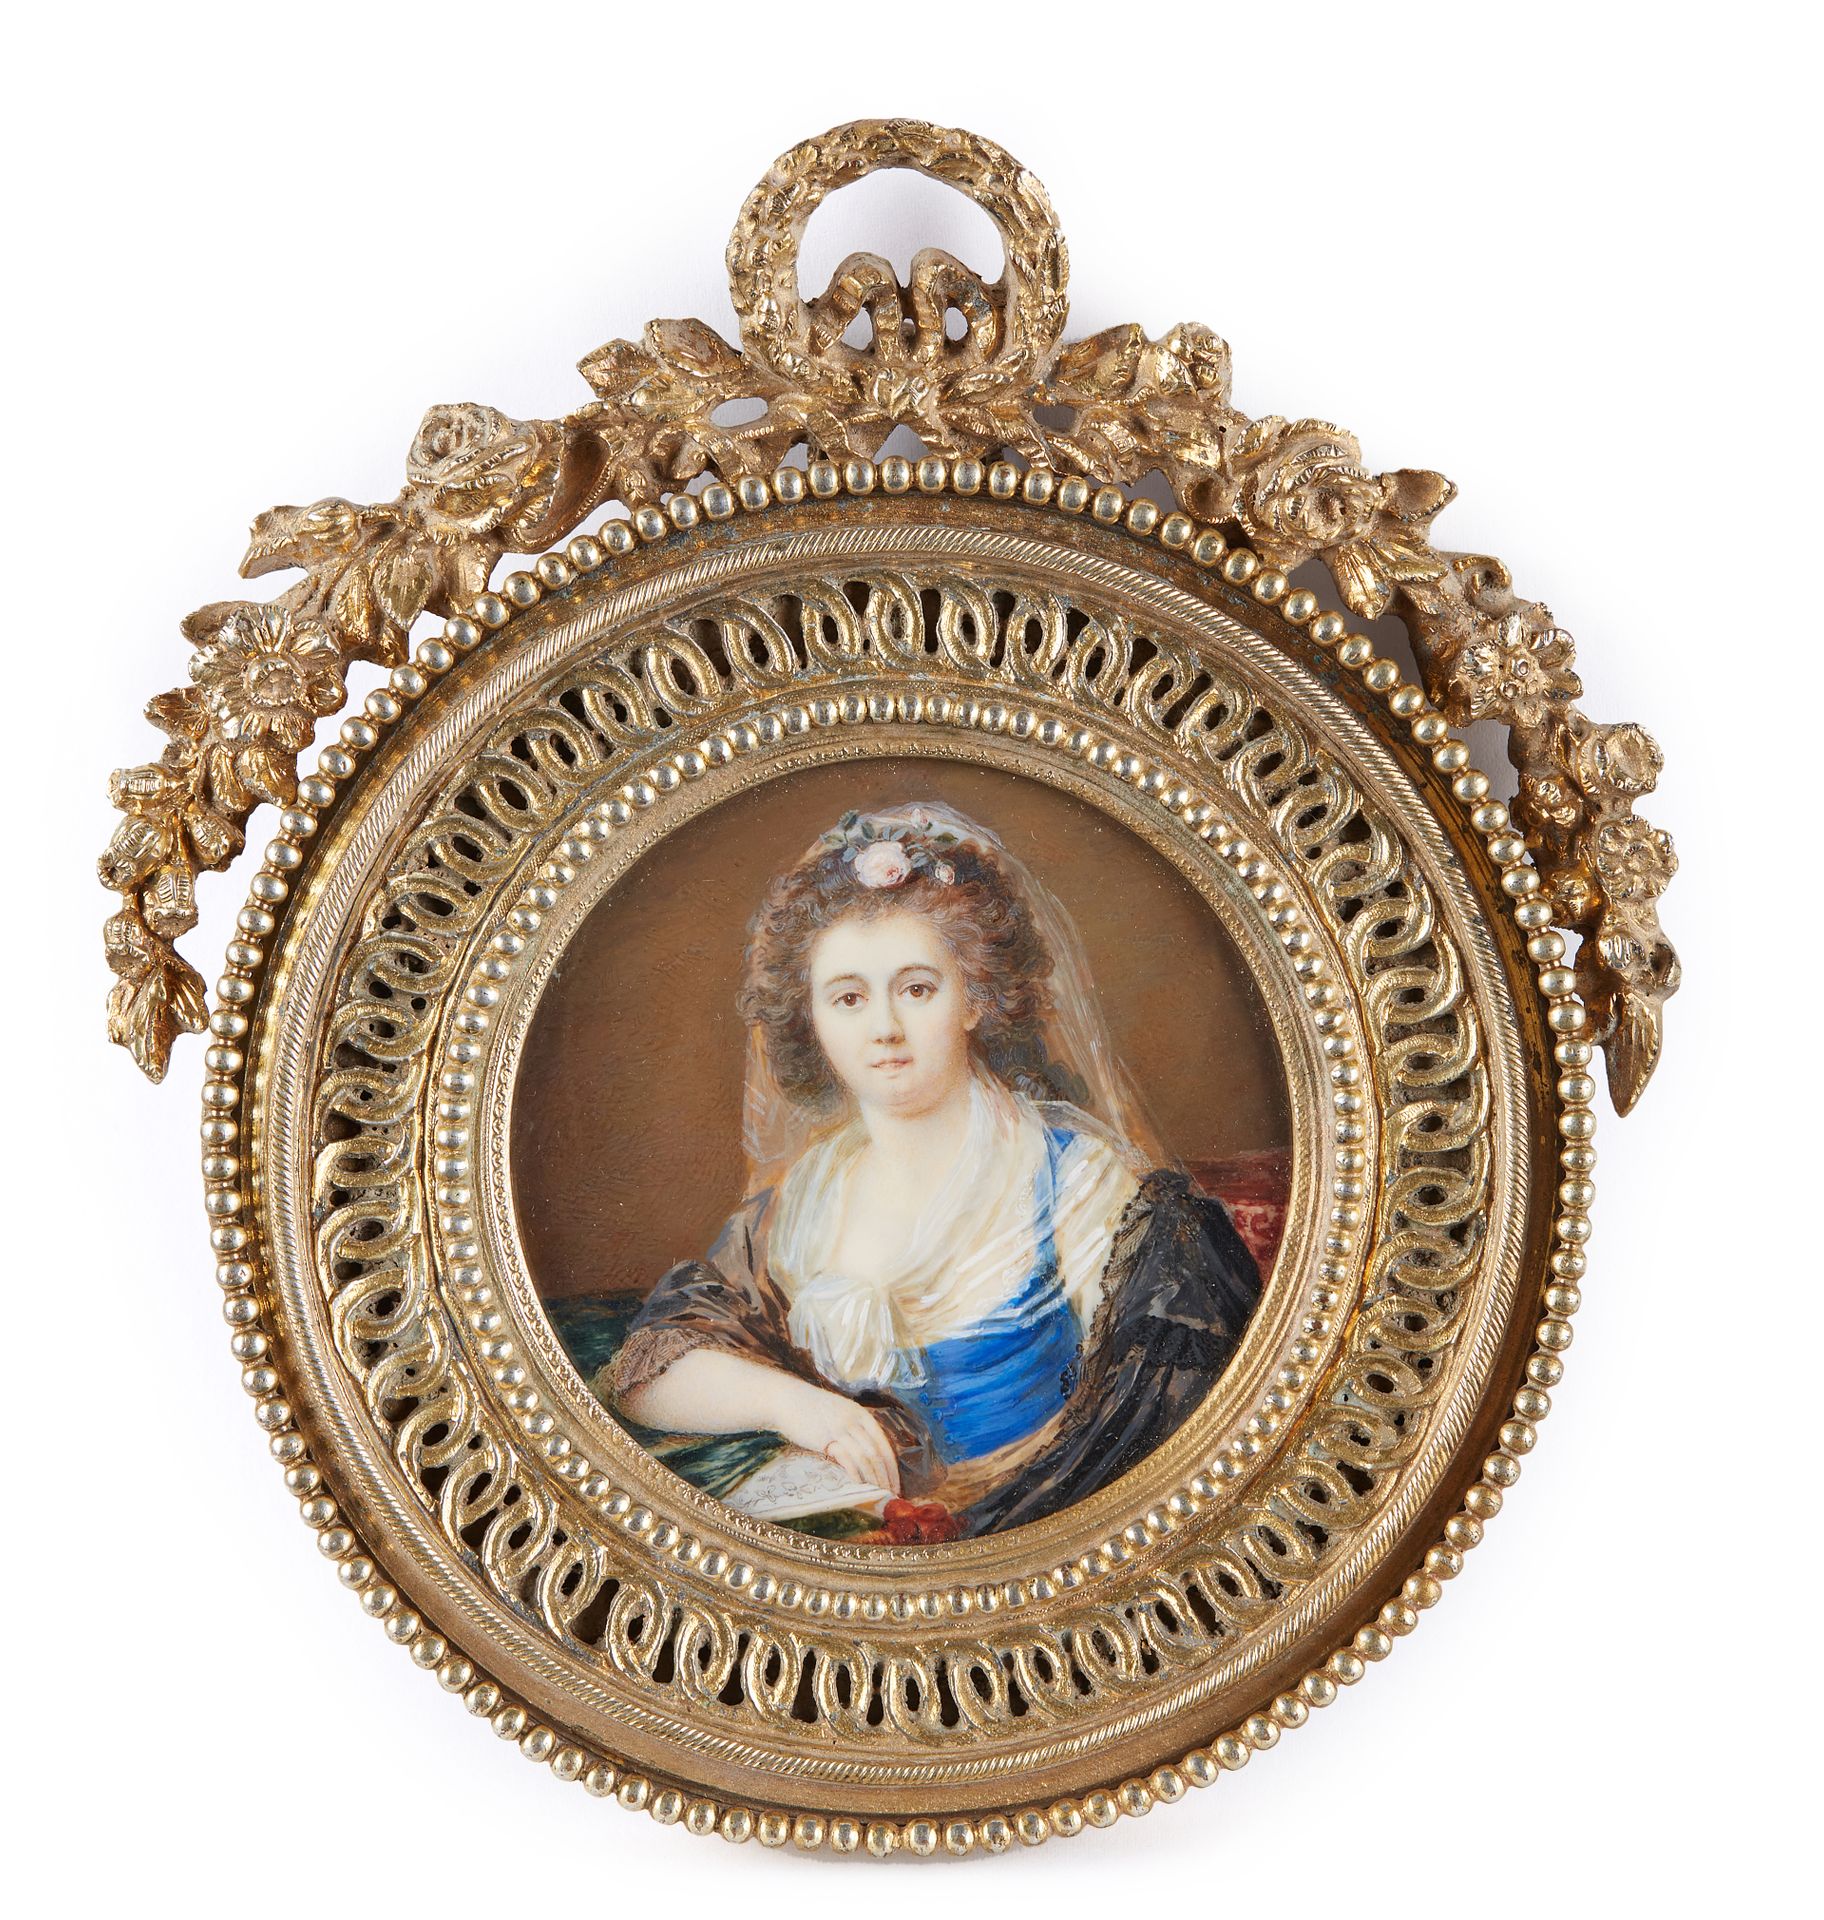 Null french school of the 18th century

Portrait of a woman

Round watercolo&hellip;